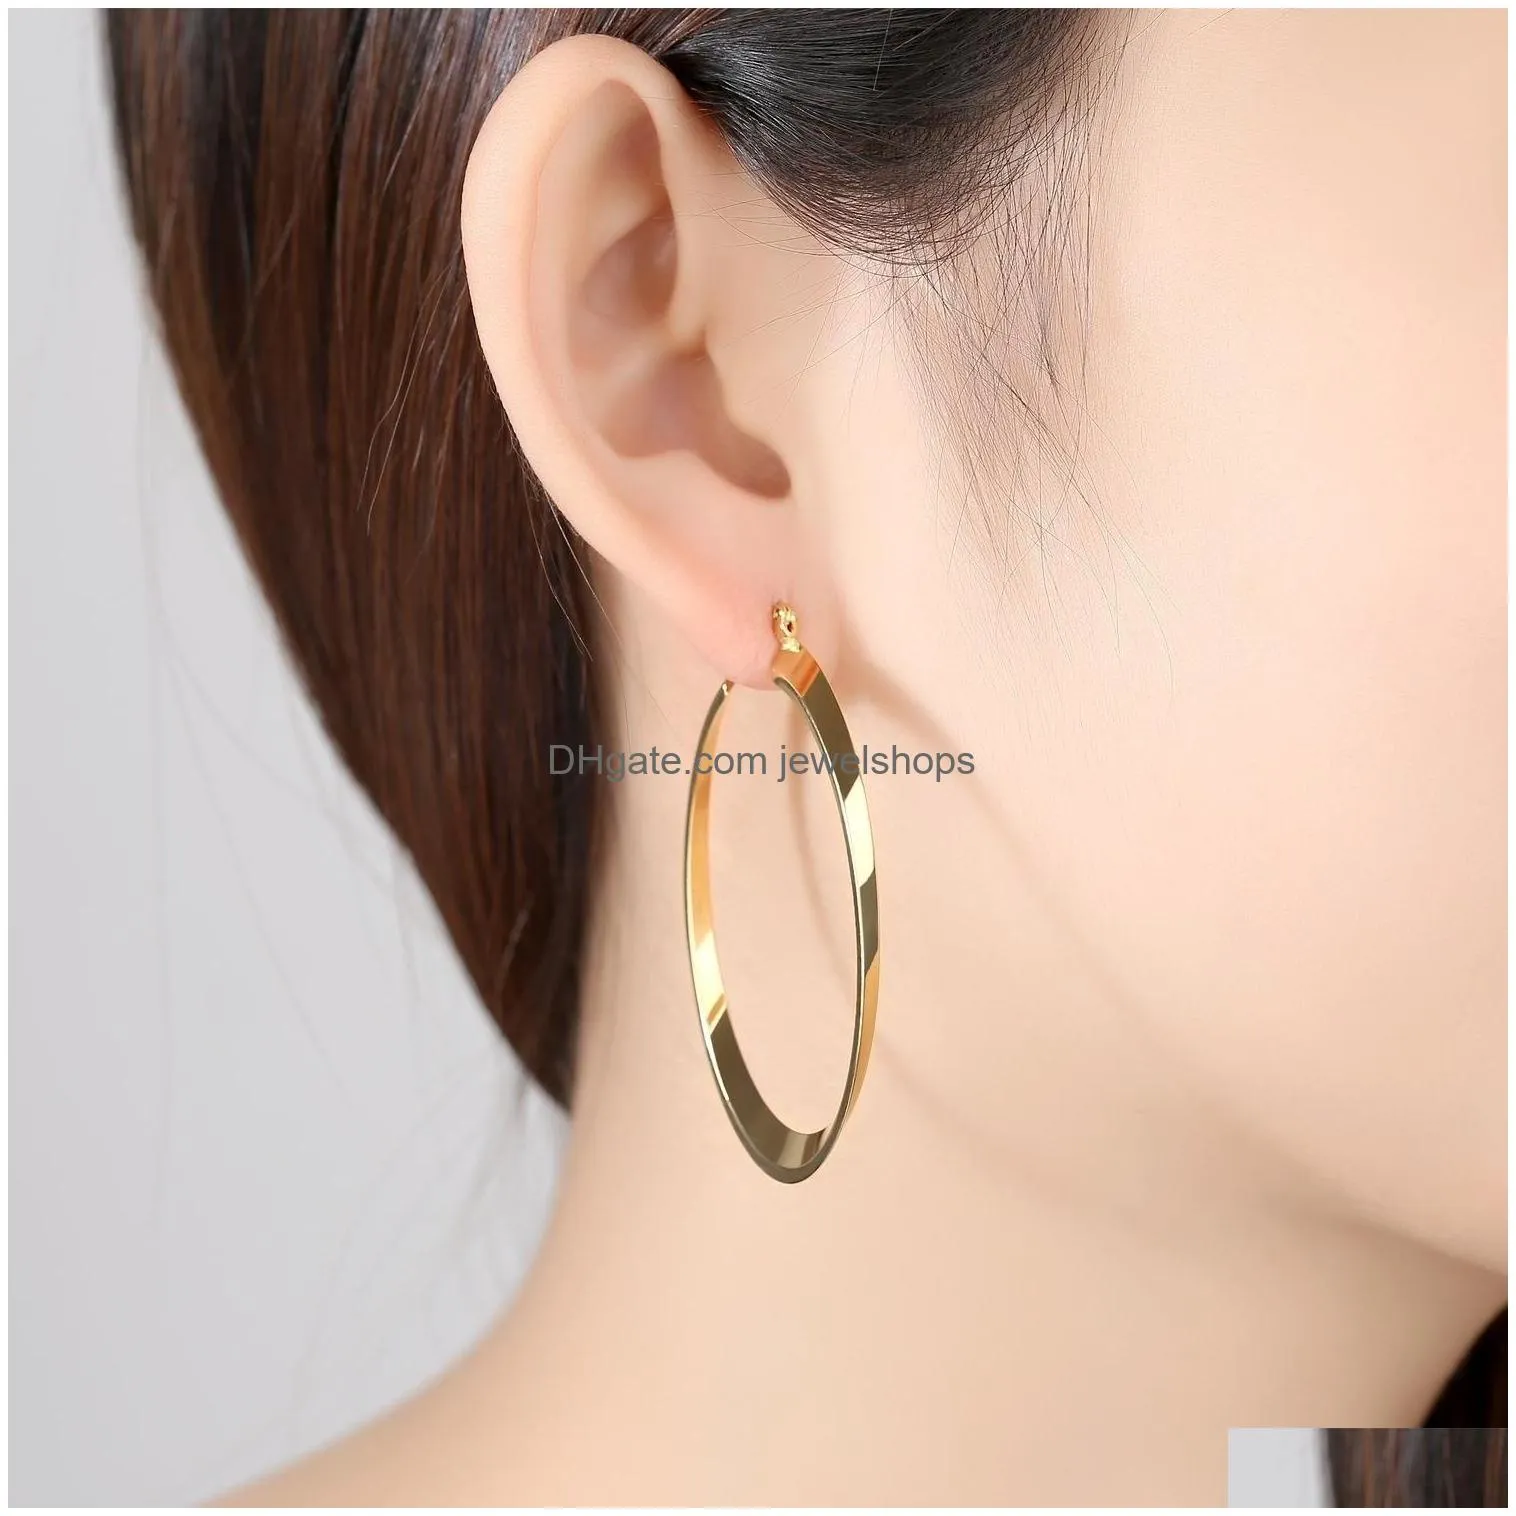 14k solid yellow gold circle hoop earrings jewelry gift for women length approx 58mm width 30mm